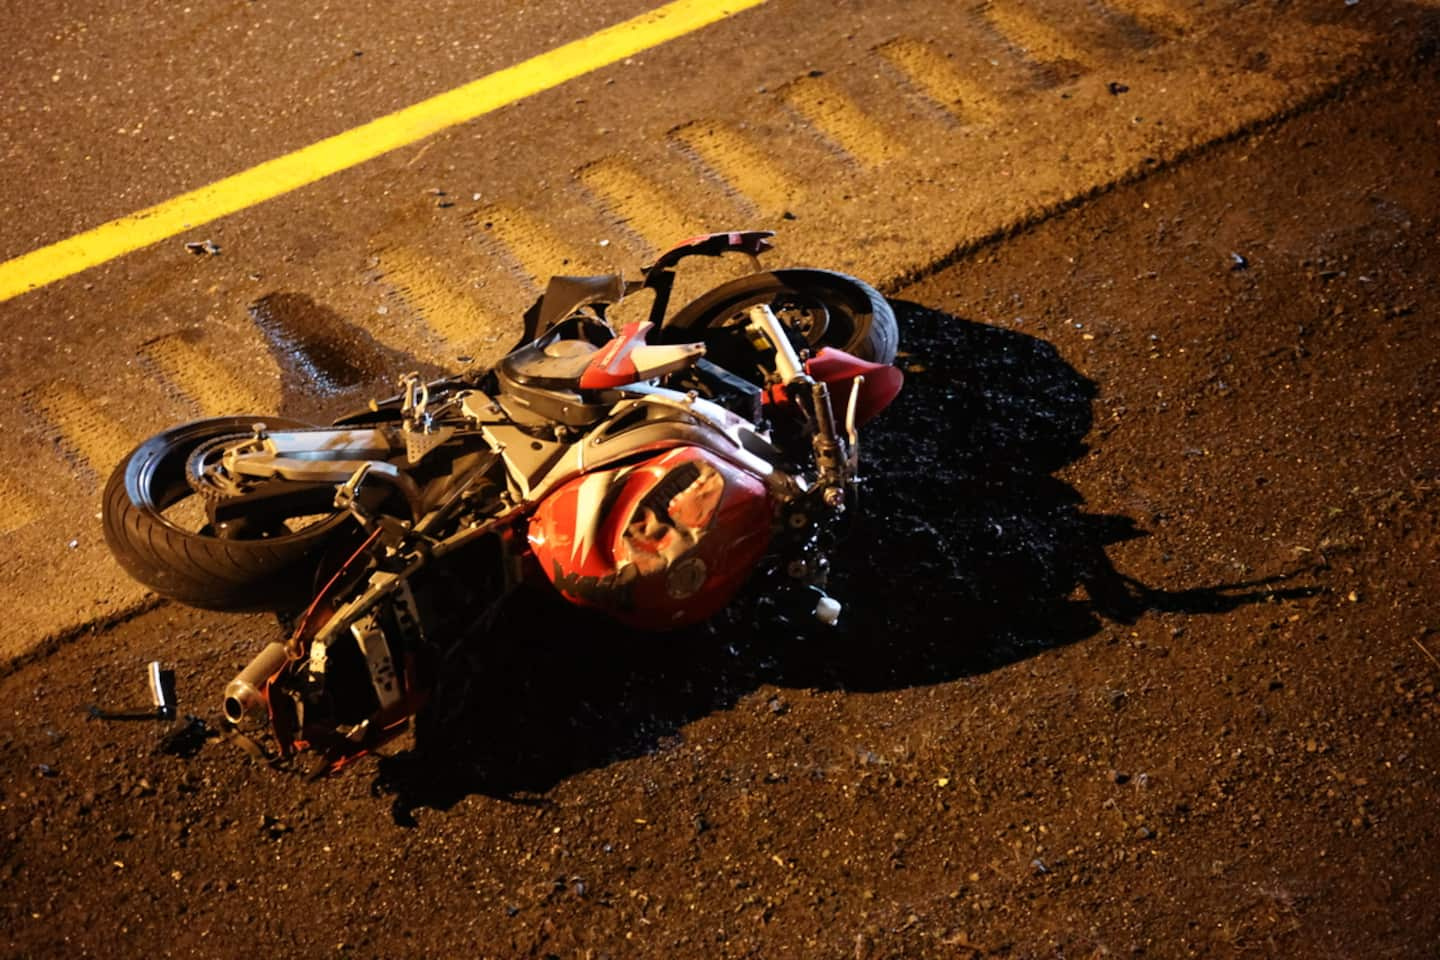 [IN IMAGES] A motorcyclist dies after going off the road in Beaumont